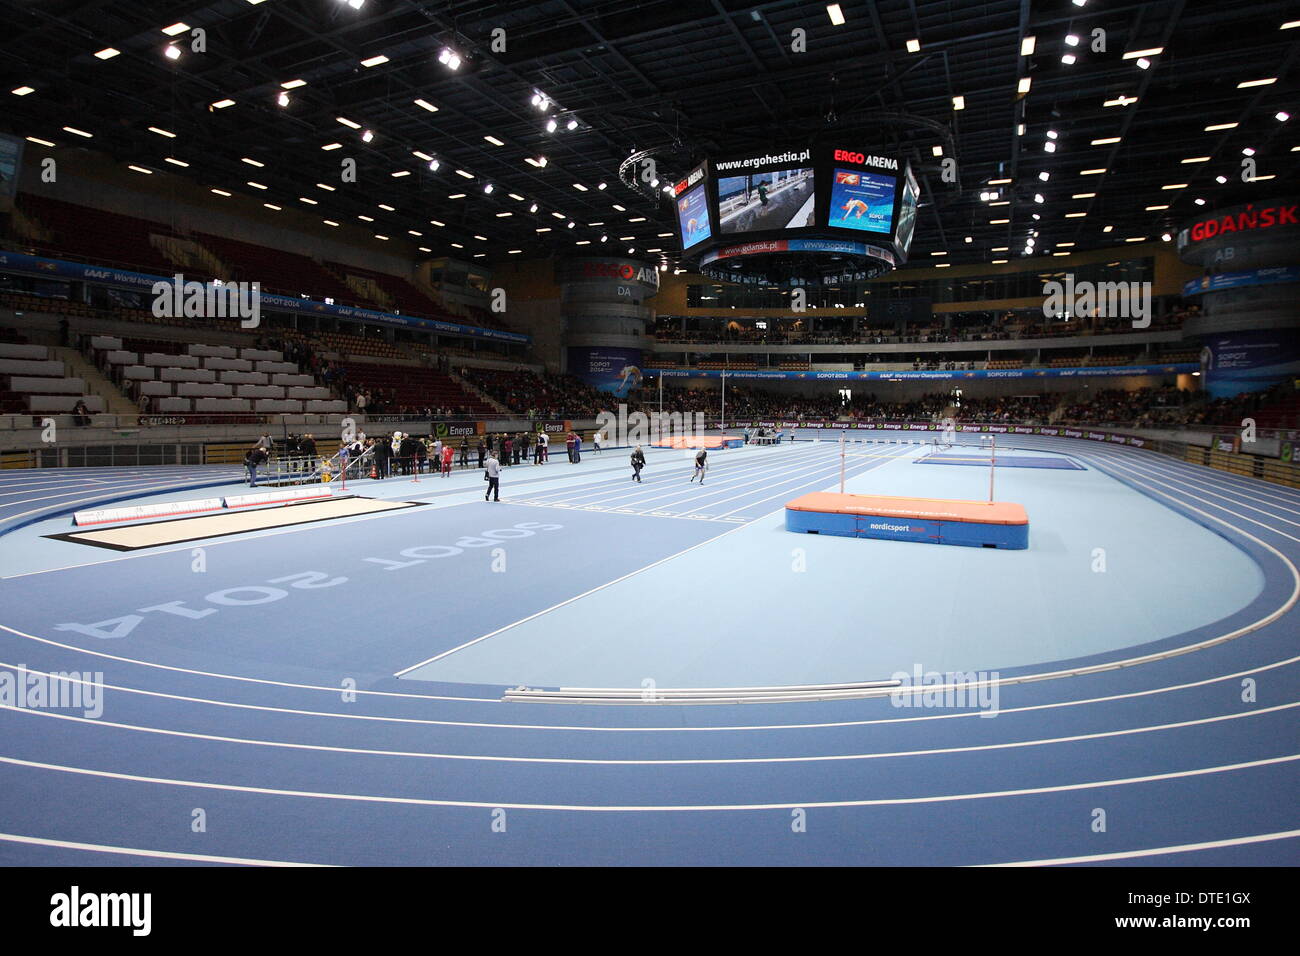 Sopot, Poland 16th, February 2014 New athletics track at the ERGO Arena sports hall is ready for the IAAF World indoor Championships Sopot 2014. Championships starts on 7th of March 2014. Stock Photo